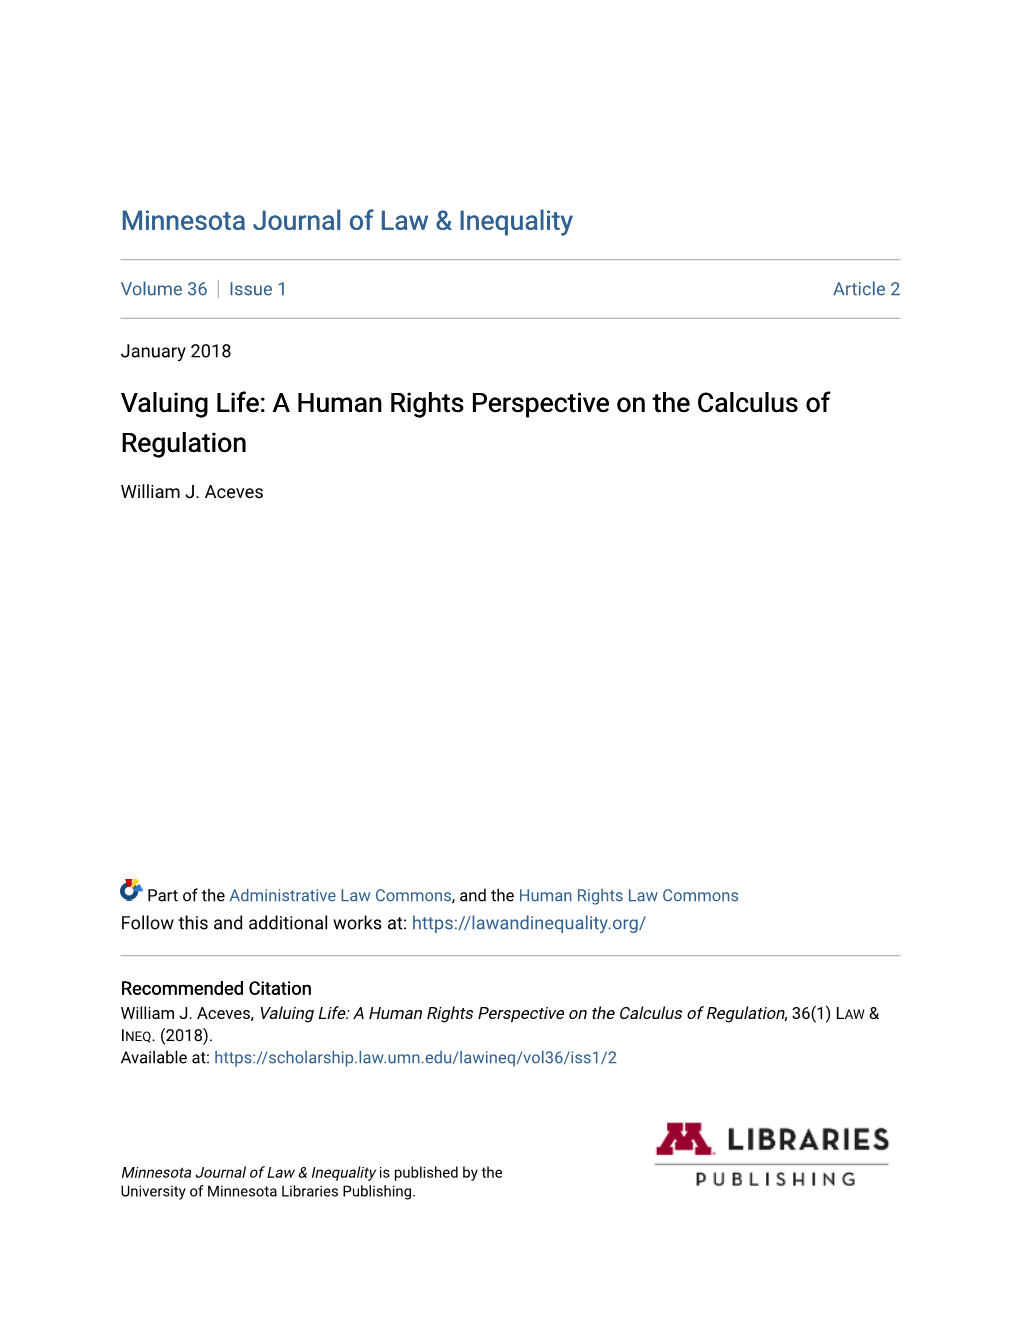 Valuing Life: a Human Rights Perspective on the Calculus of Regulation